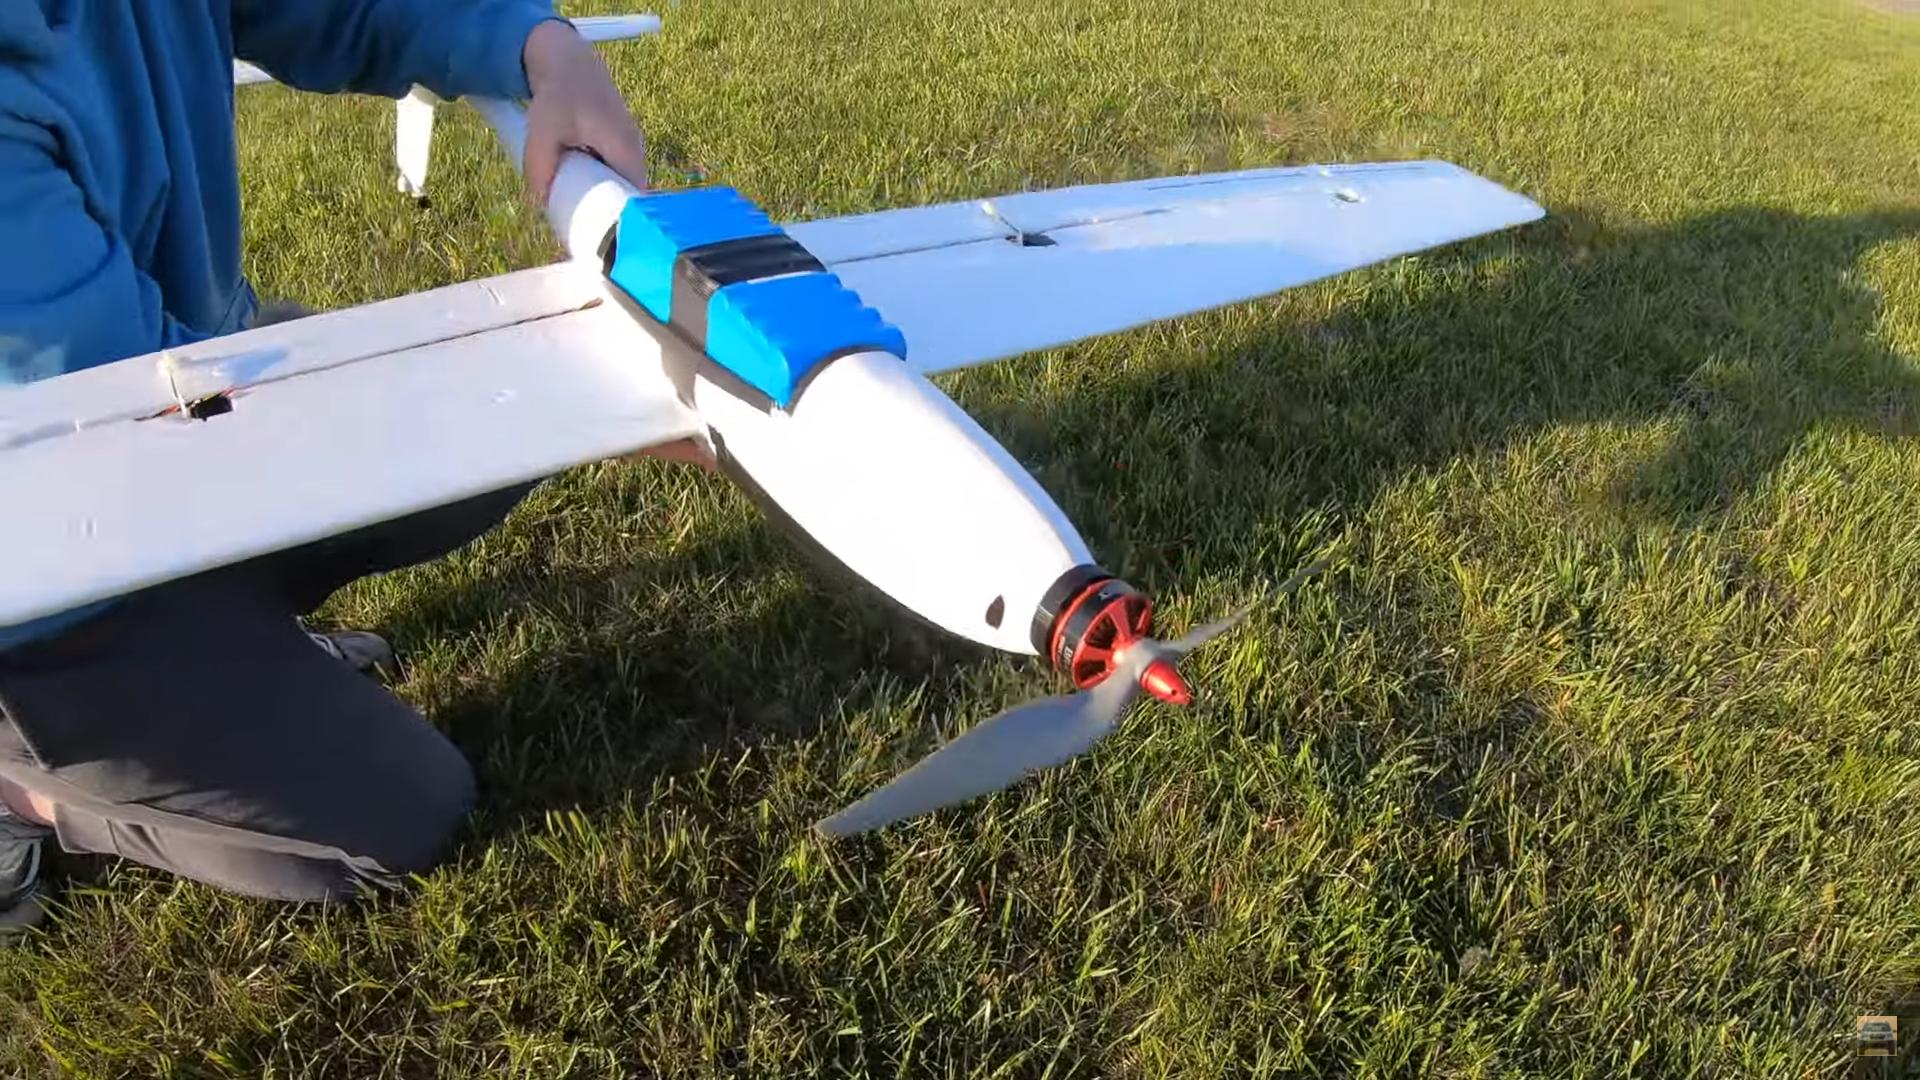 Radio Controlled Planes For Sale: Maintain Your Radio-Controlled Plane for Longer Flights